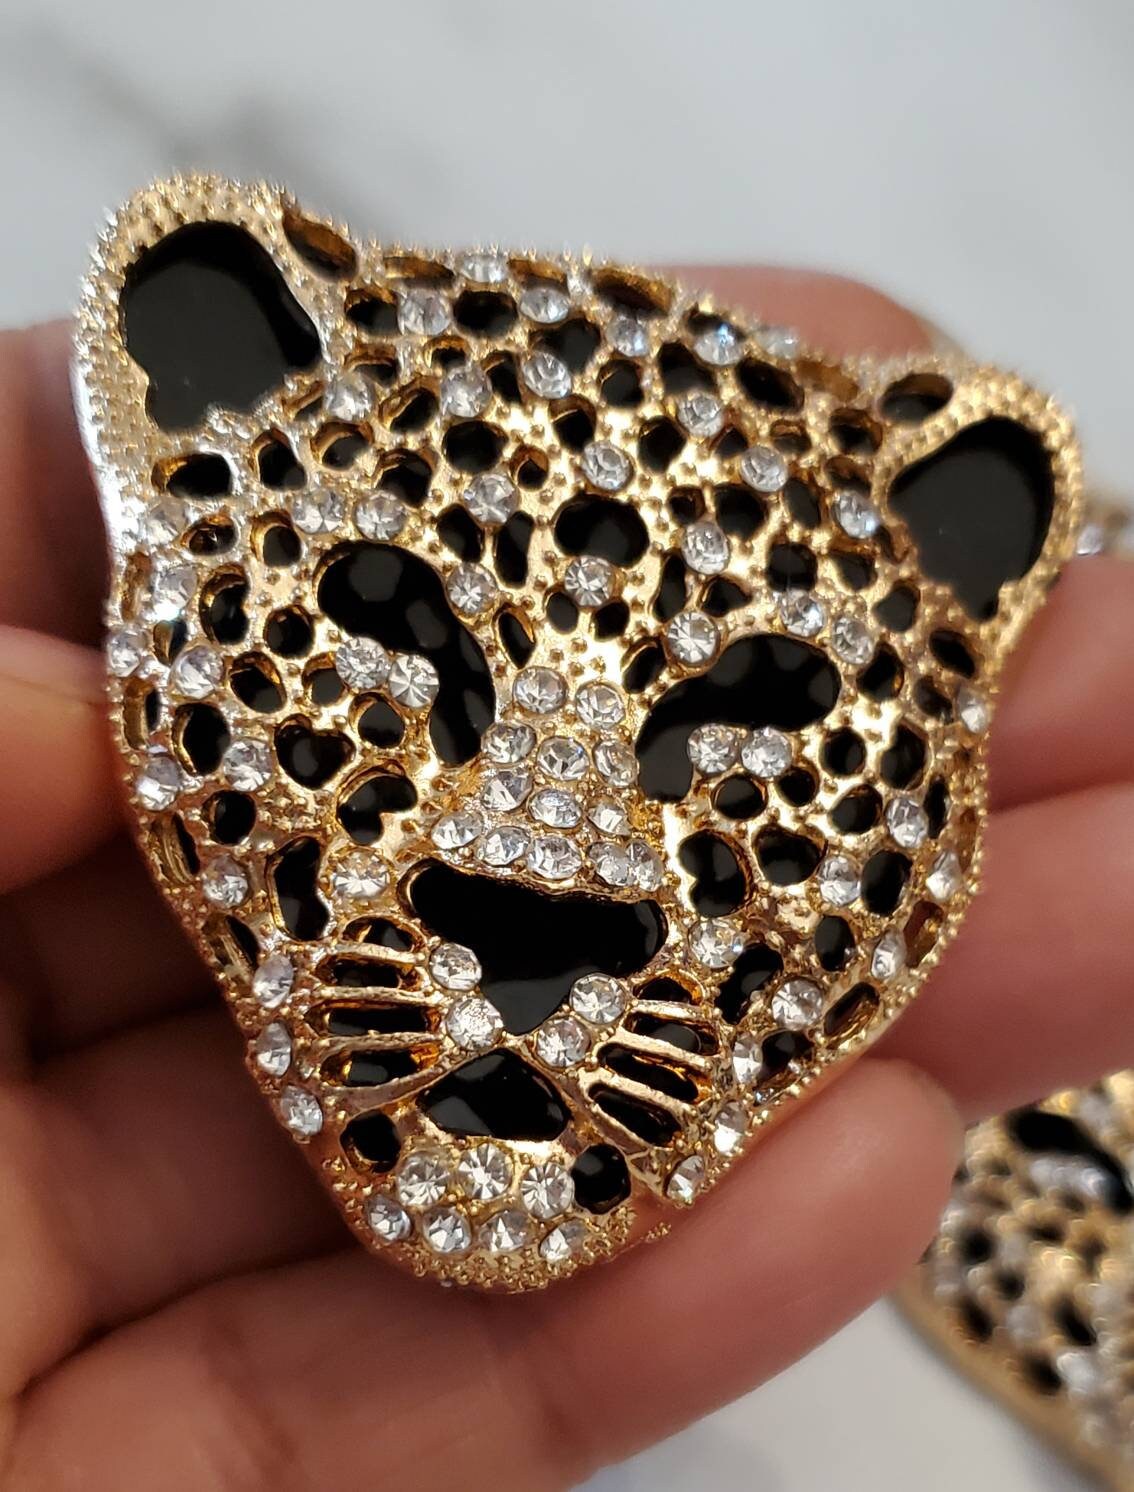 Exclusive, Gold & Black Leopard Charm with Rhinestones, 1-pc Flatback Charm for Crocs, Phone Cases, Sunglasses, Decor, and More! Size 2"x2"